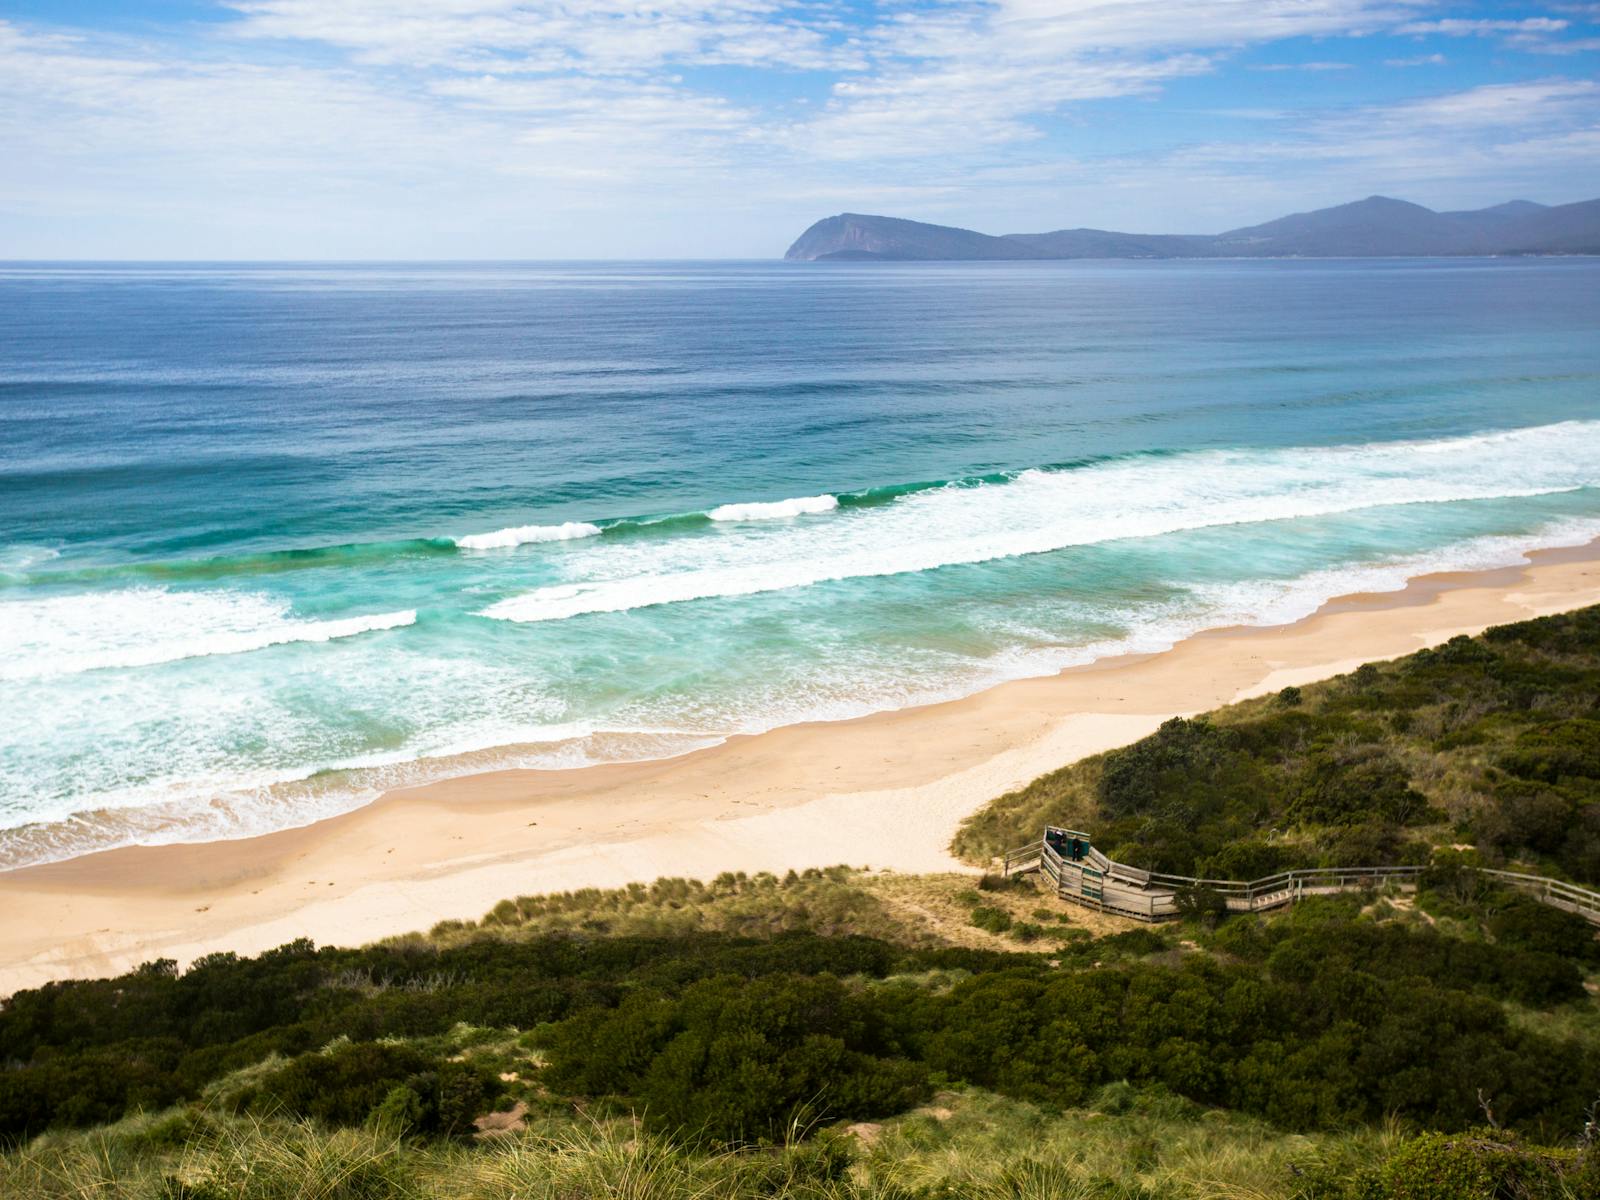 Take your time and discover hidden corners of Bruny Island with Adventure Trails Tasmania